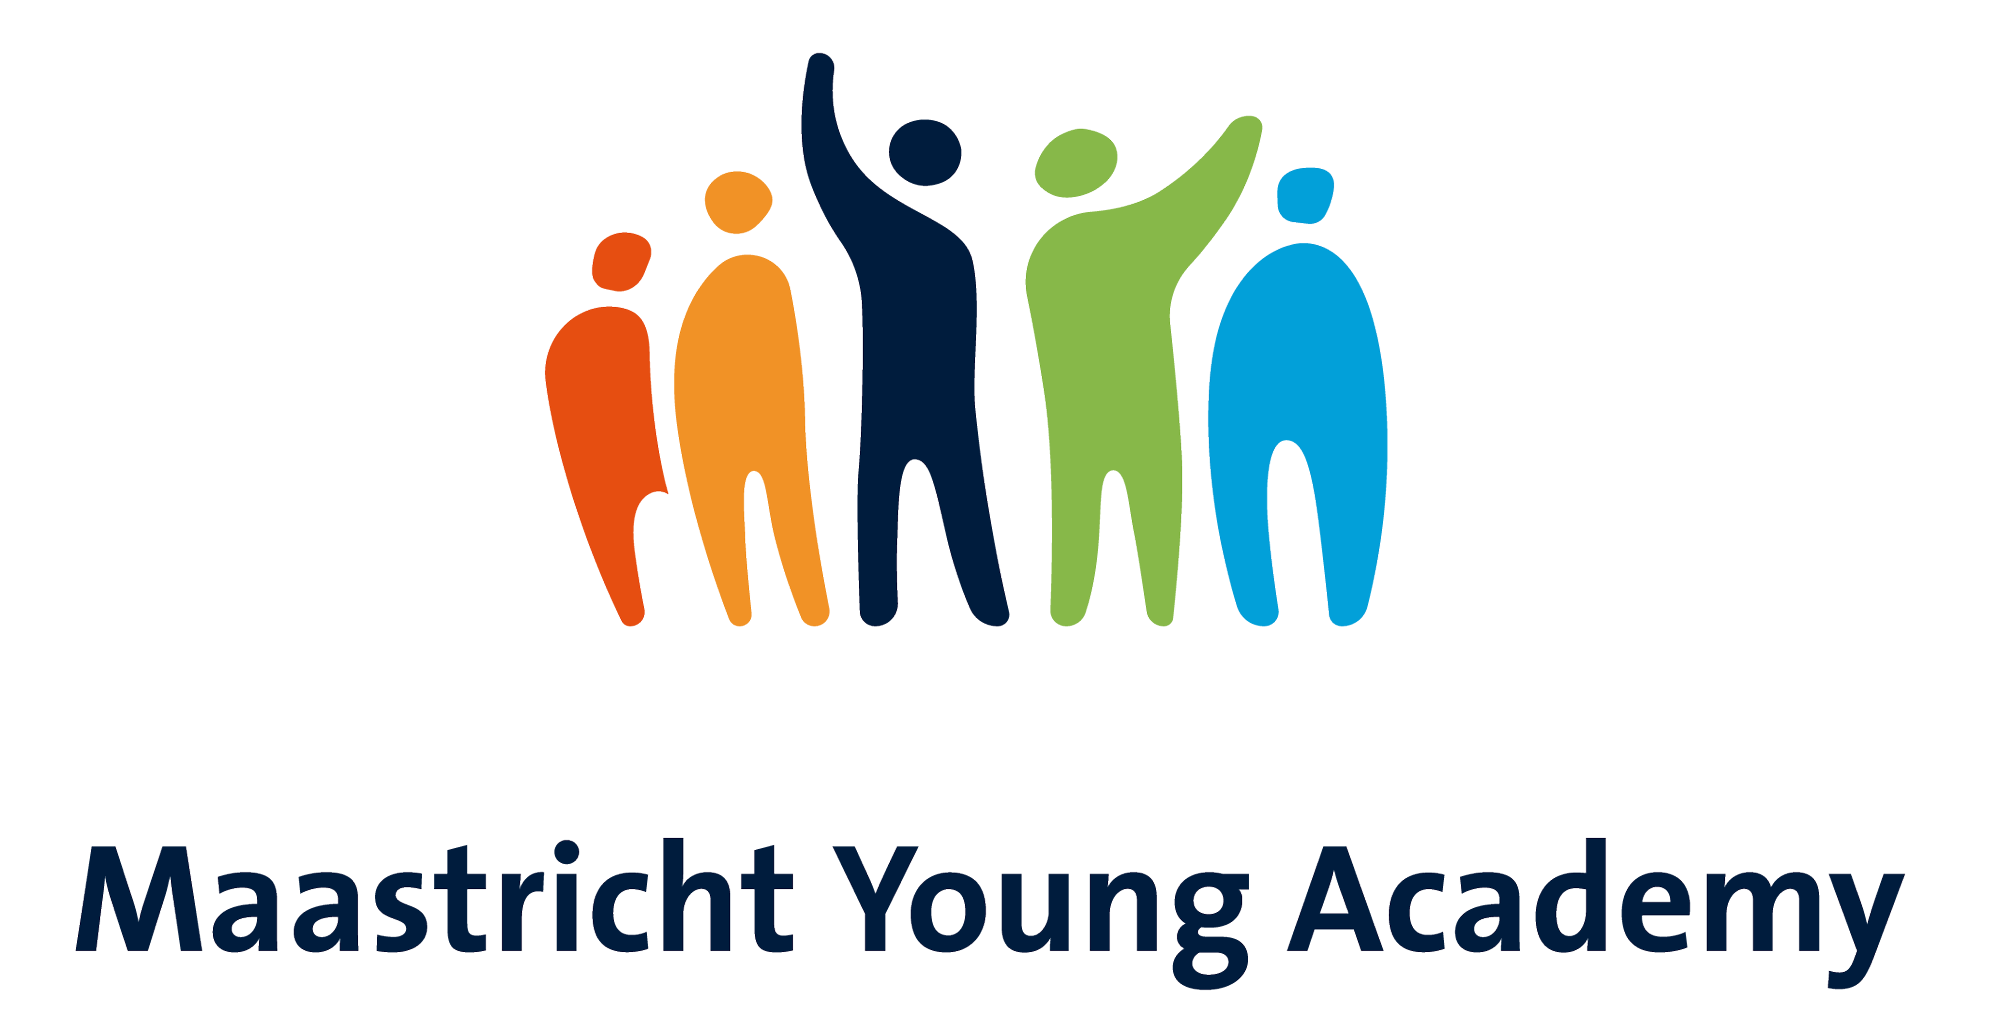 Maastricht Young Academy logo